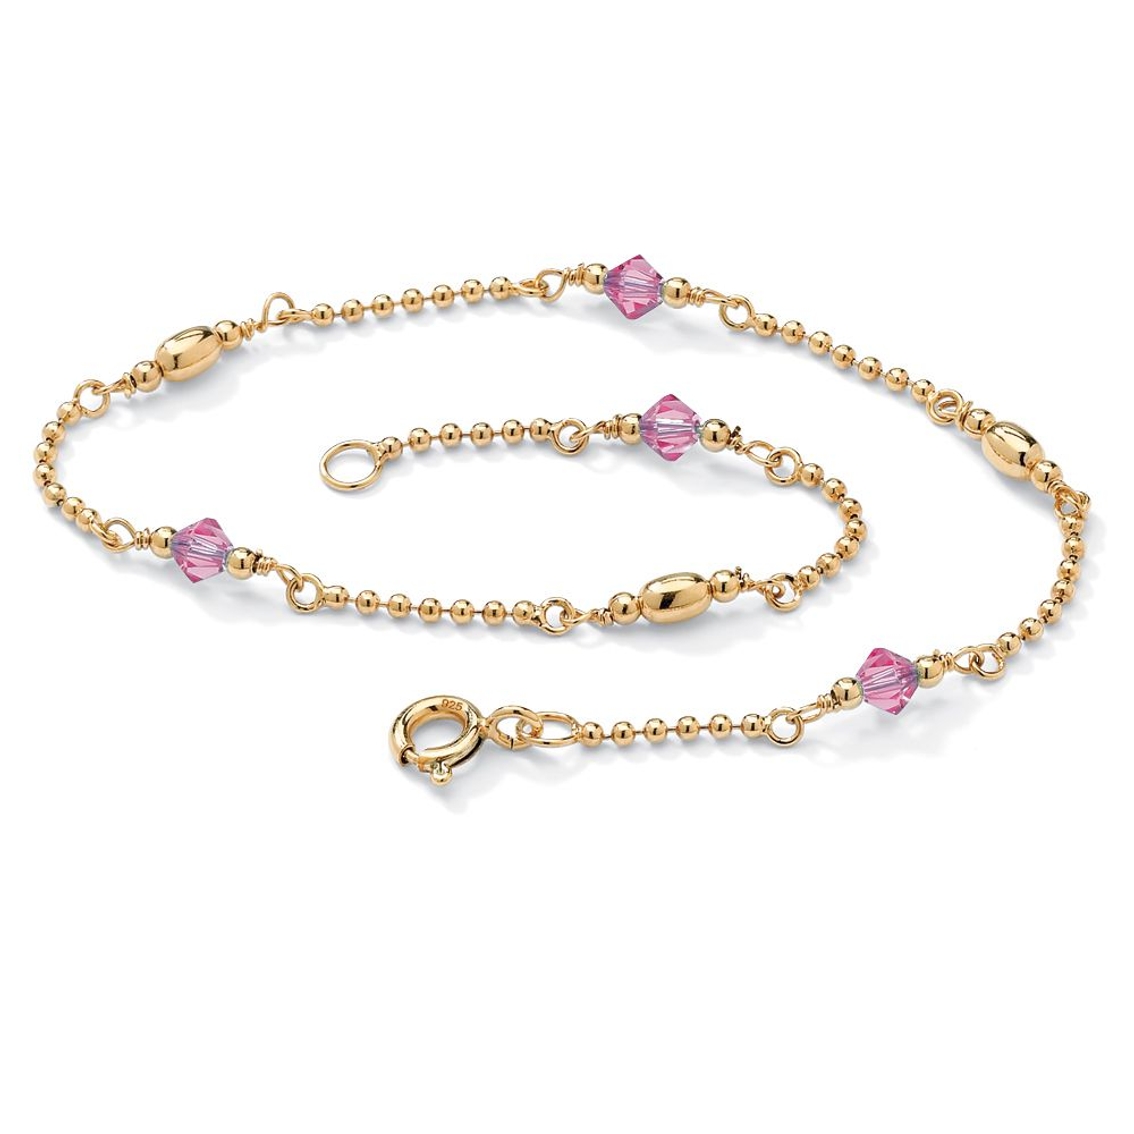 PalmBeach Birthstone Gold-Plated Sterling Silver Ankle Bracelet - Image 1 of 4